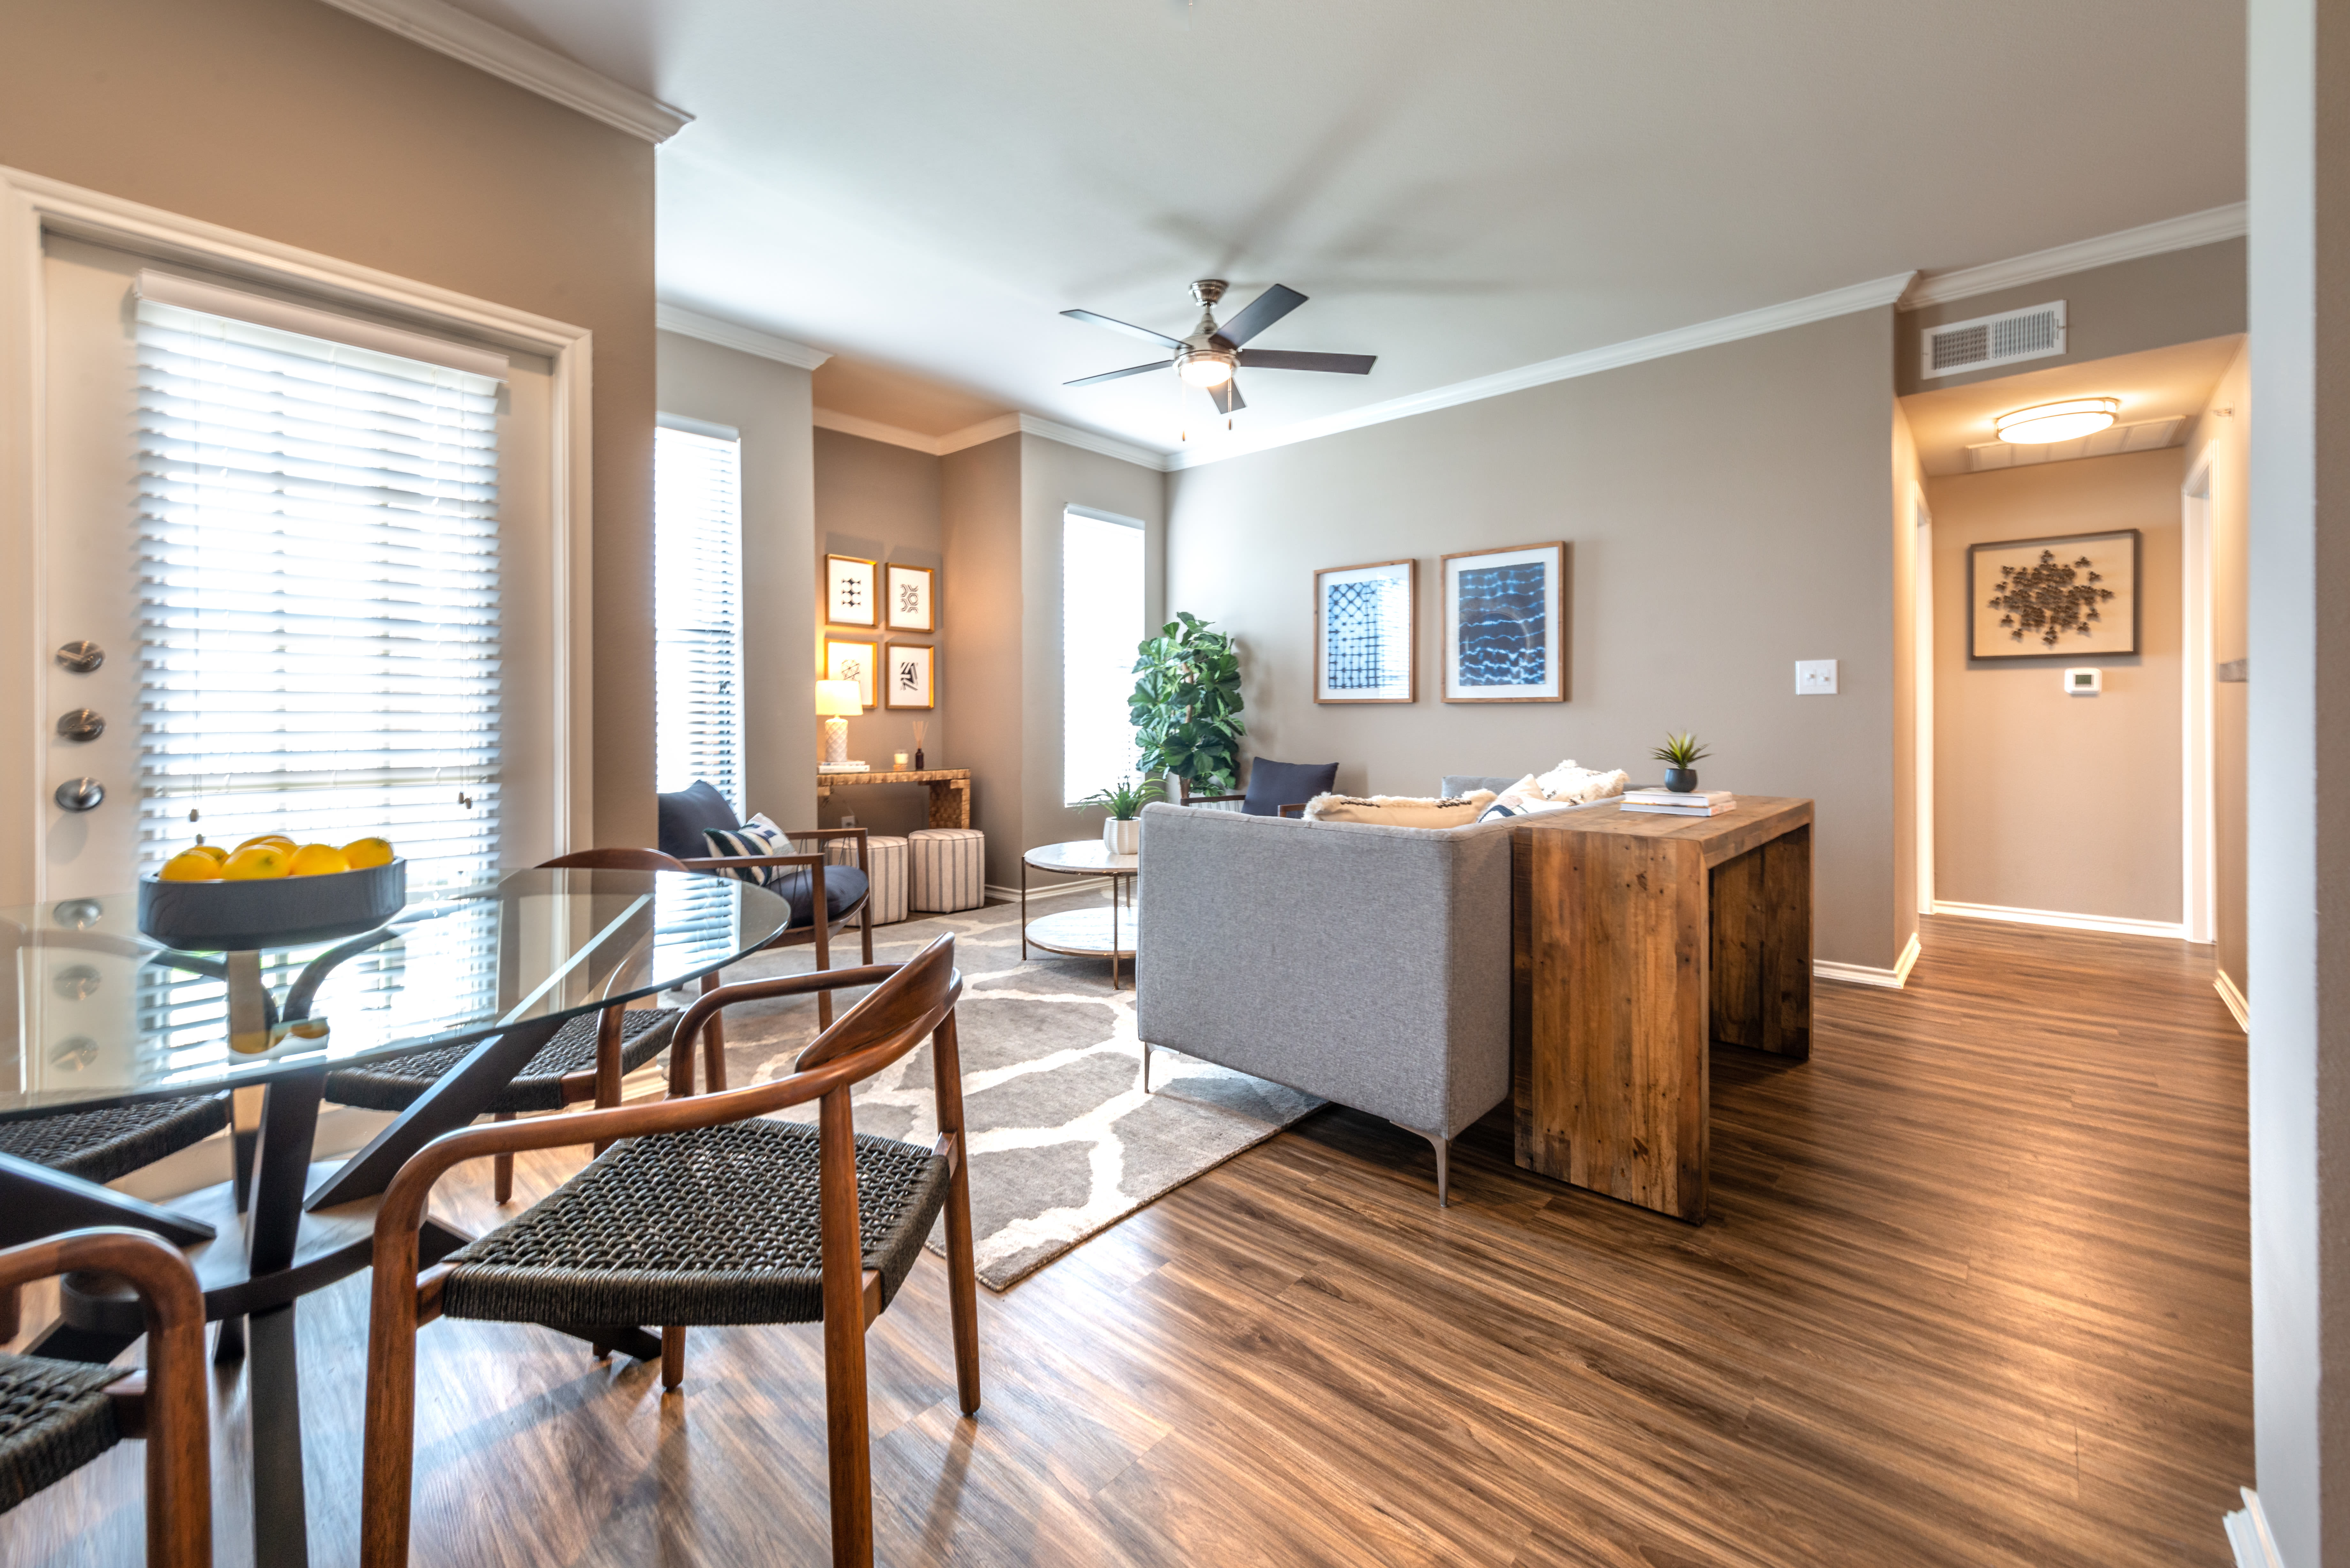 Dining area in a model home at Olympus Team Ranch in Benbrook, Texas